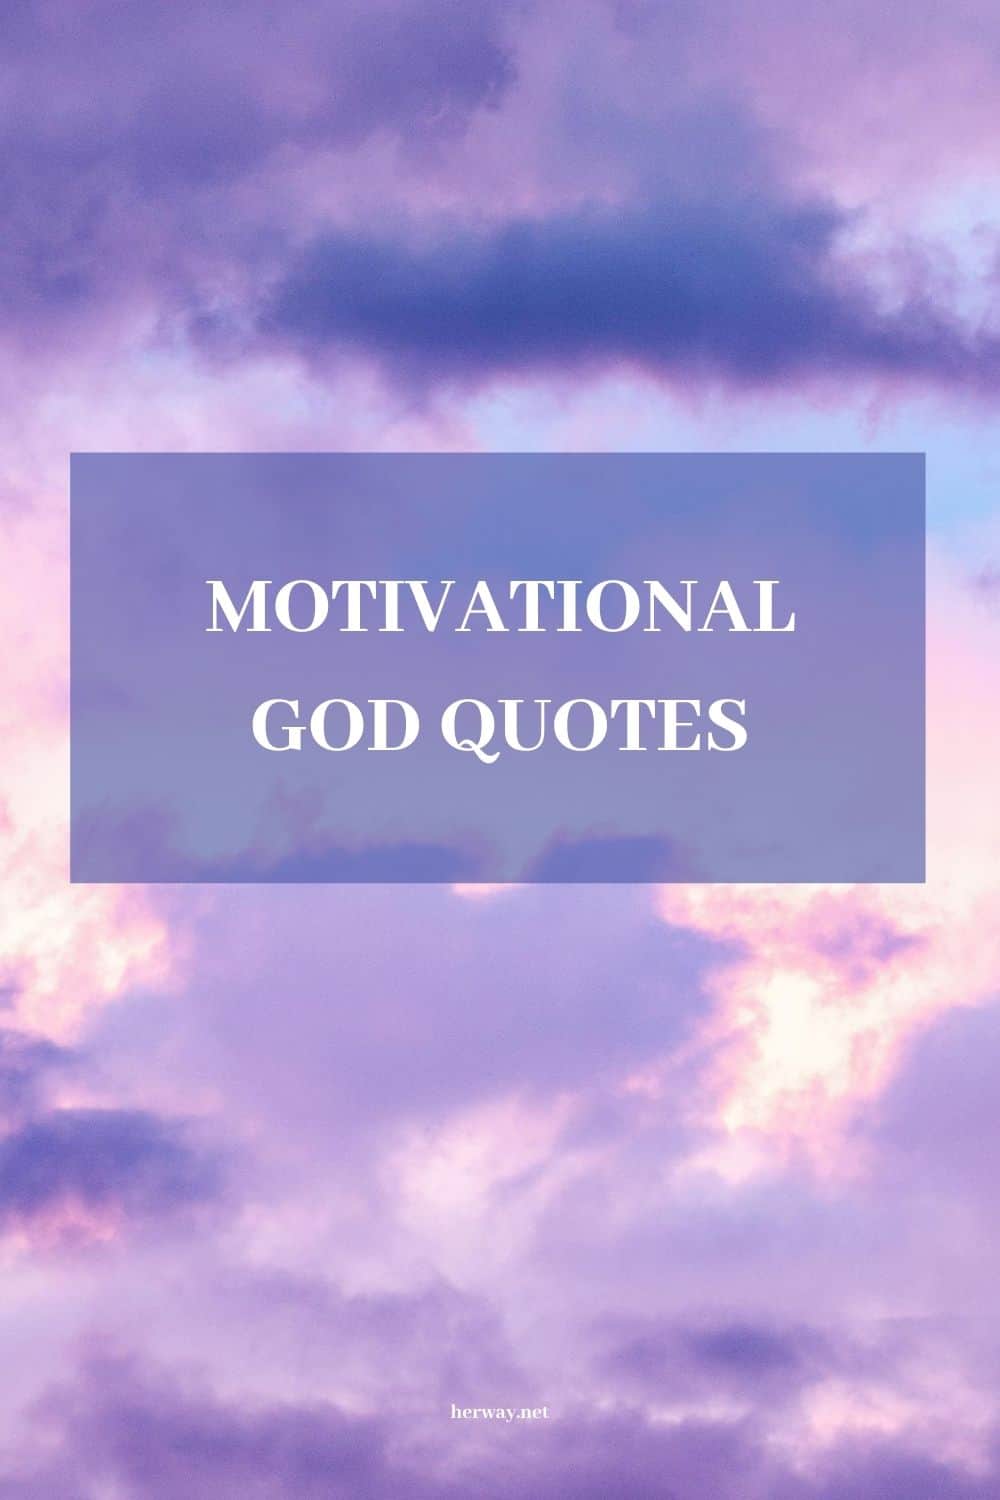 God Quotes Uplifting Sayings To Inspire And Empower You